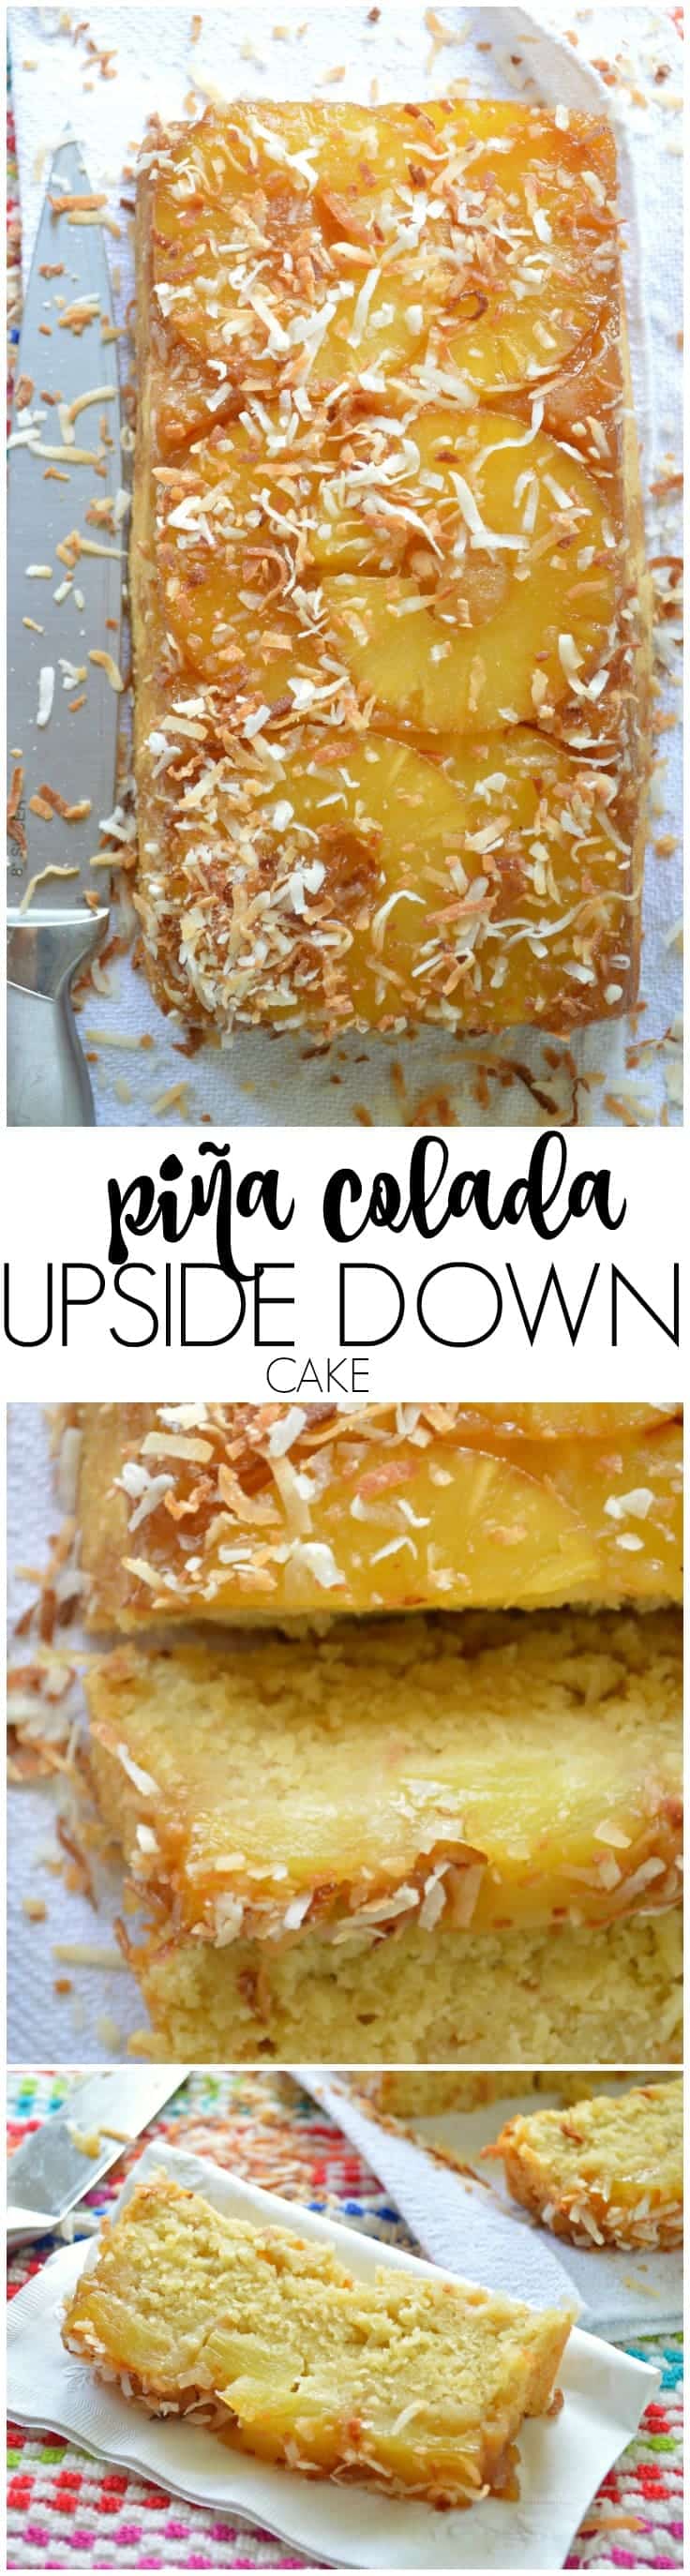 This Pina Colada Upside Down Cake Recipe is loaded with all the flavors of your favorite fruity cocktail! Pineapple, coconut, and of course there's RUM